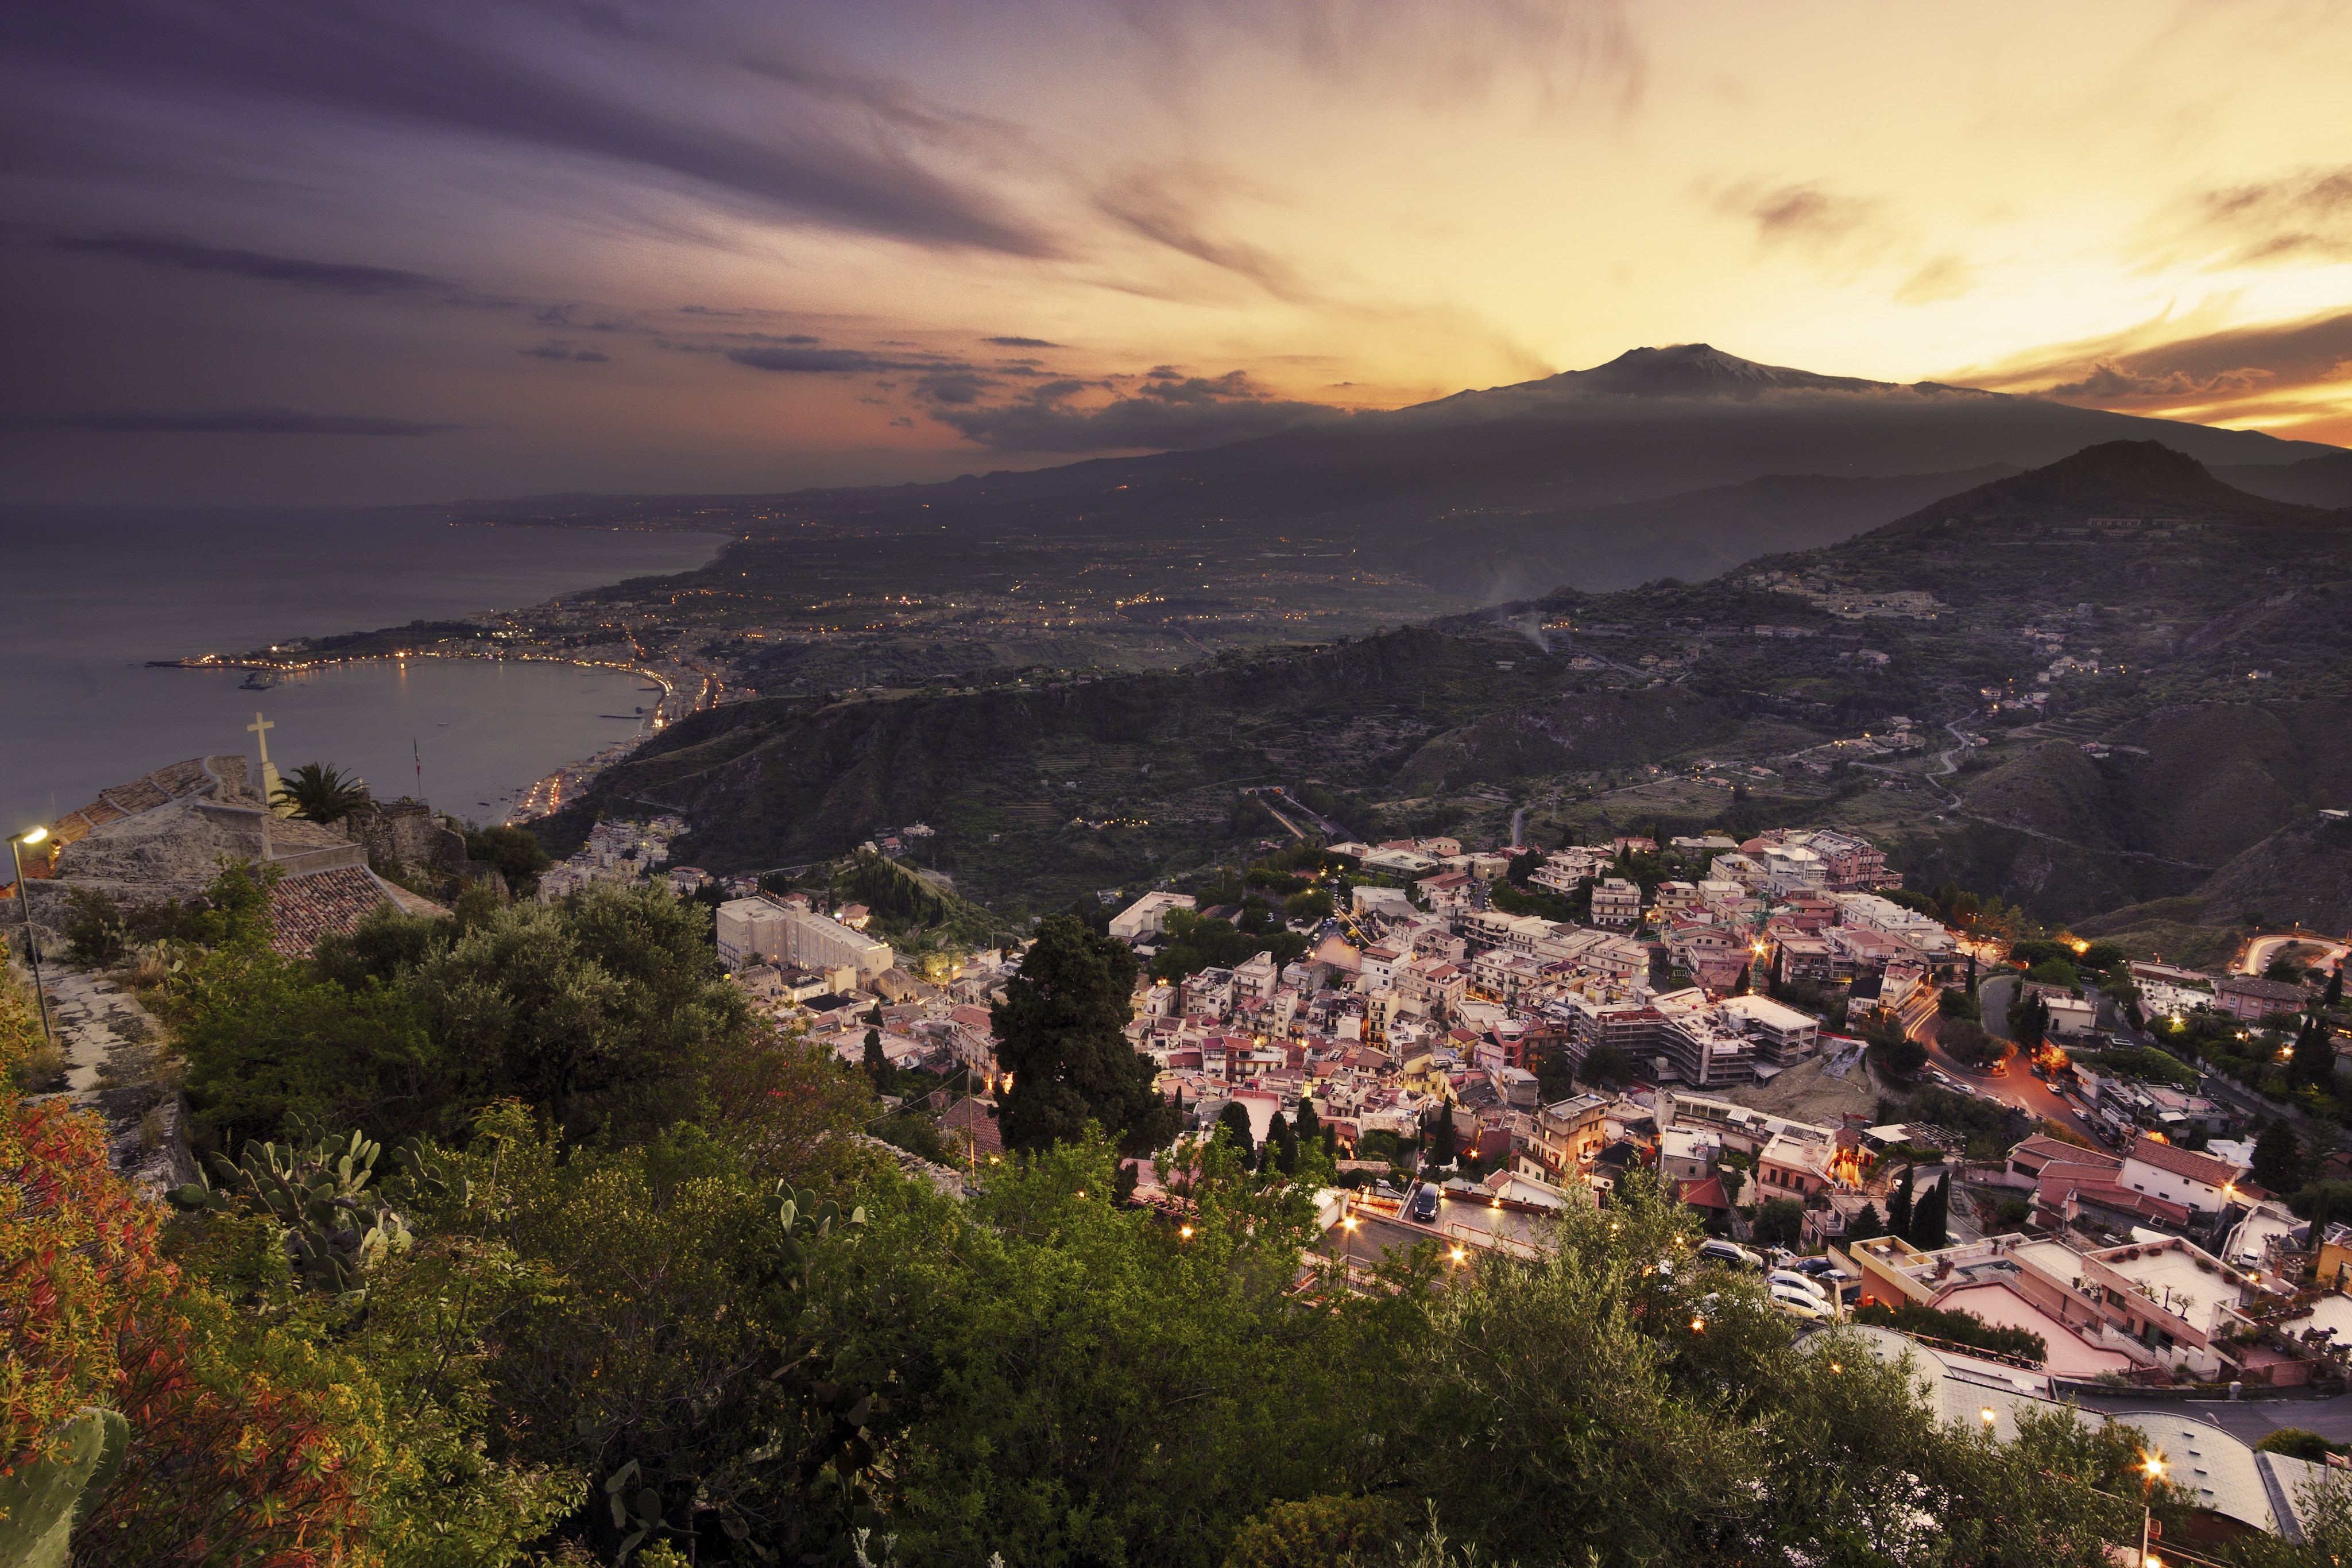 An aerial view of Mount Etna at sunset from Taormina in Sicily, Italy. Photo: Shutterstock